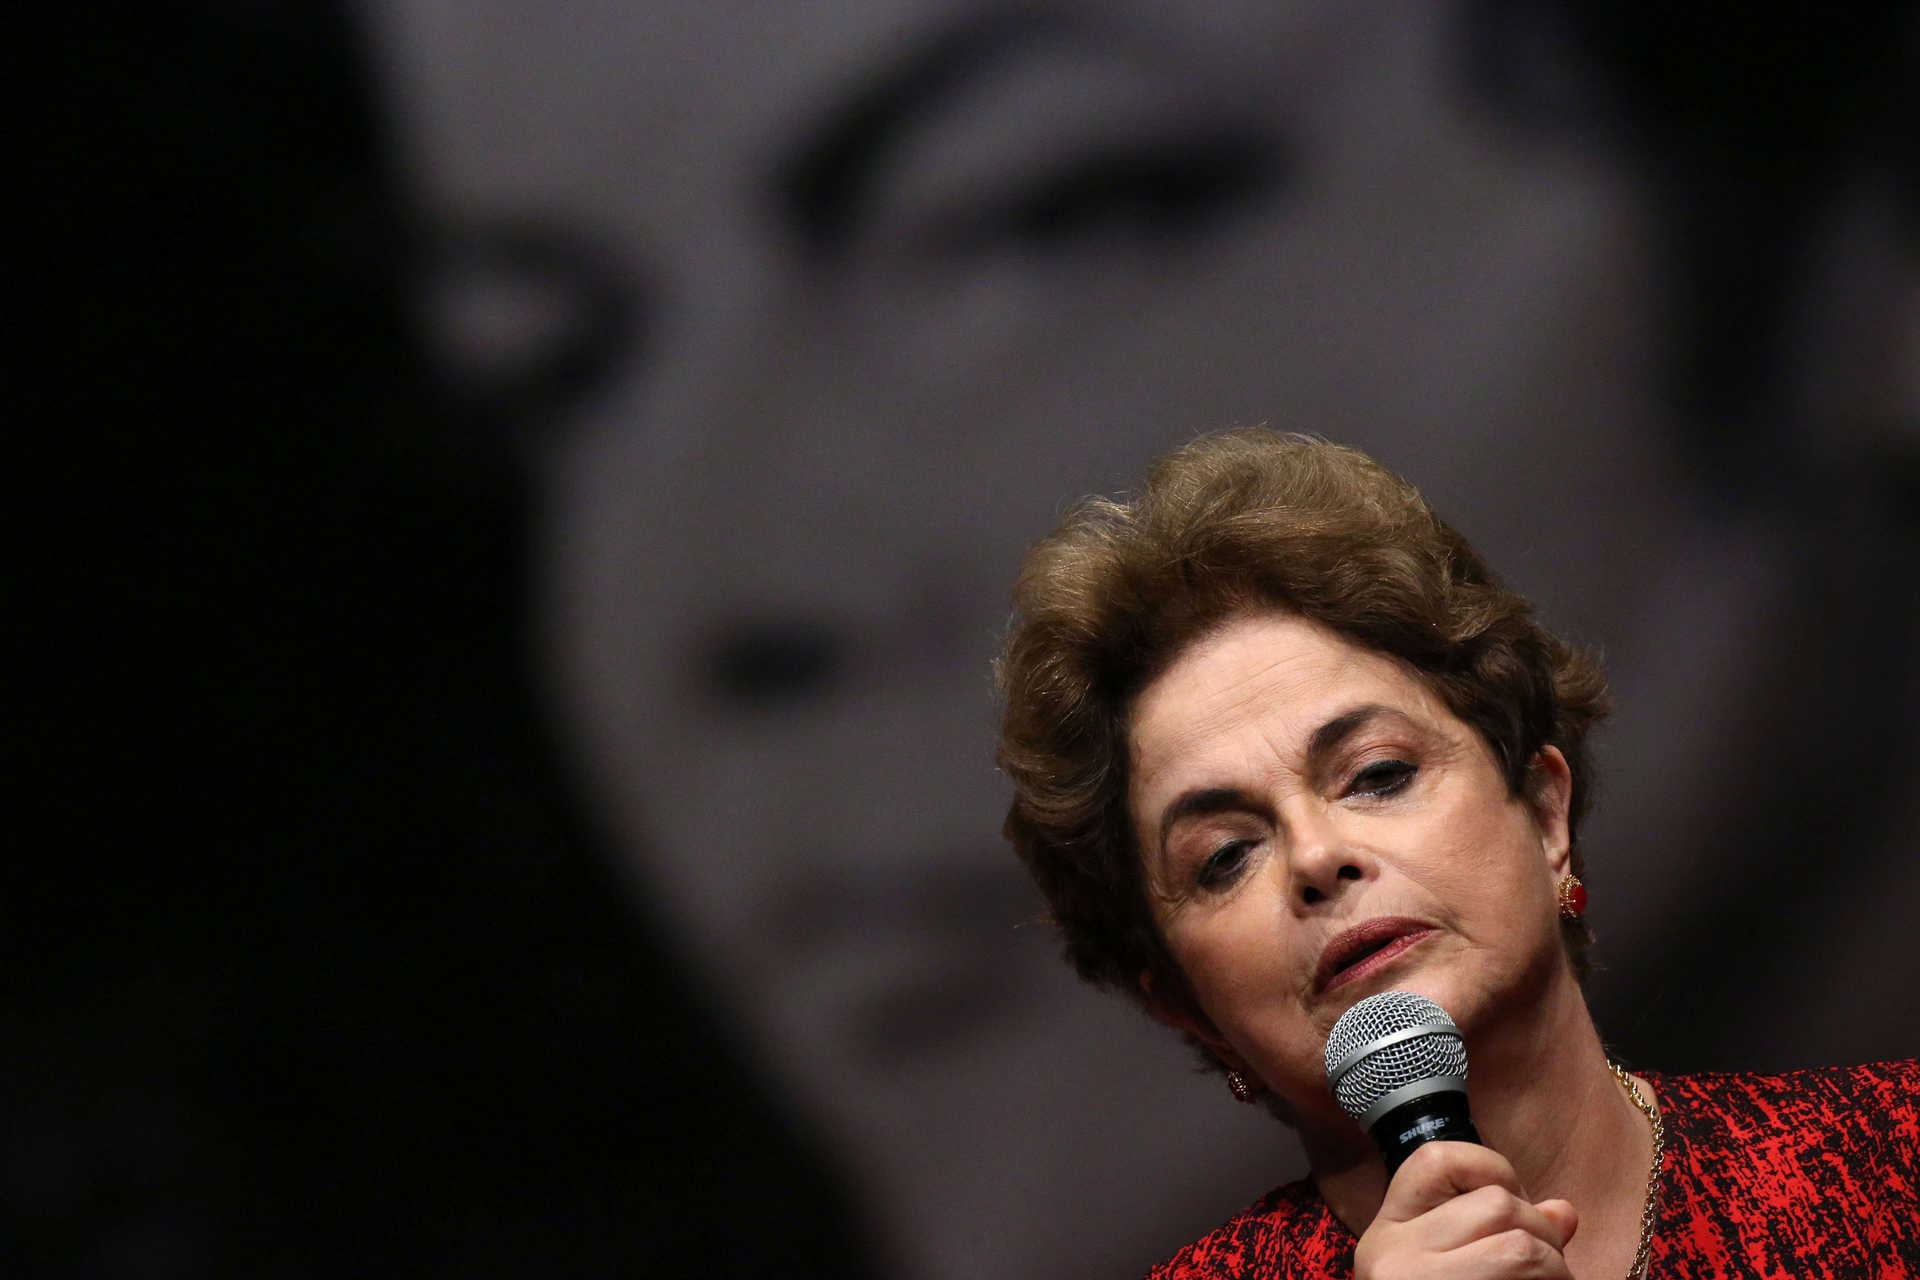 Brazil's suspended President Dilma Rousseff speaks during a meeting with people from pro-democracy movements in Brasilia